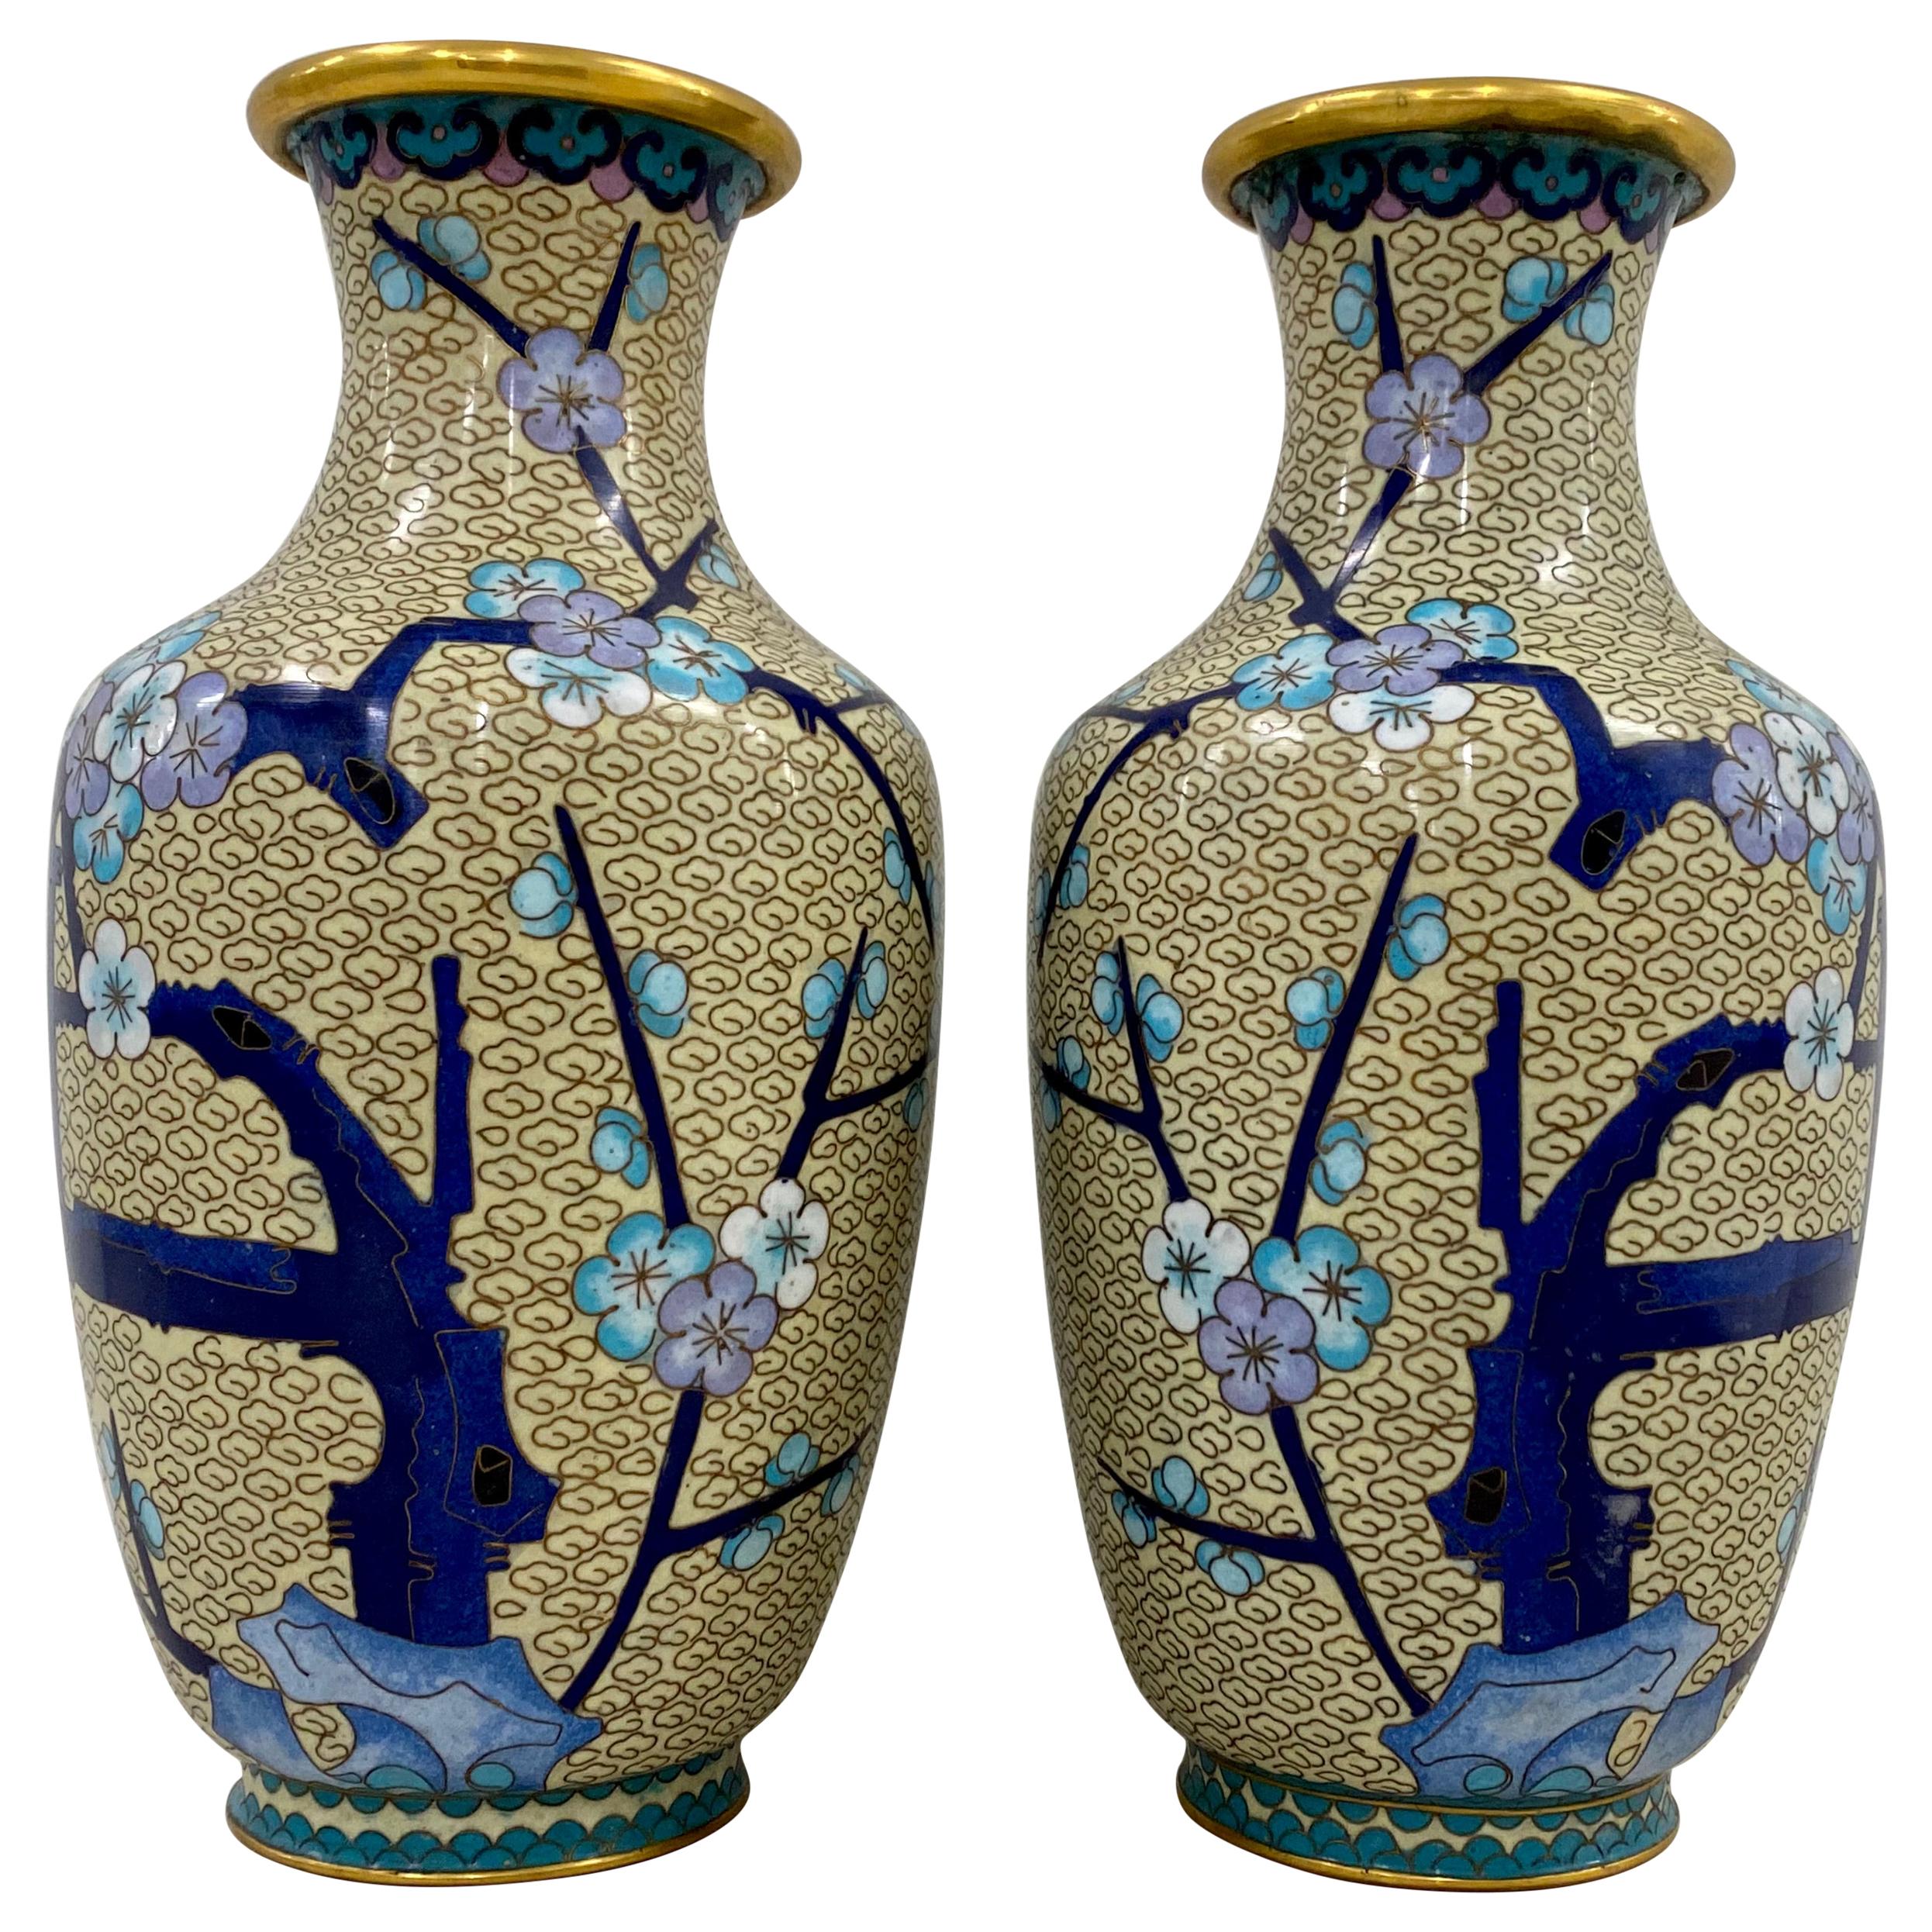 Cloisonne Vases, a Pair, Early to Mid 20th Century